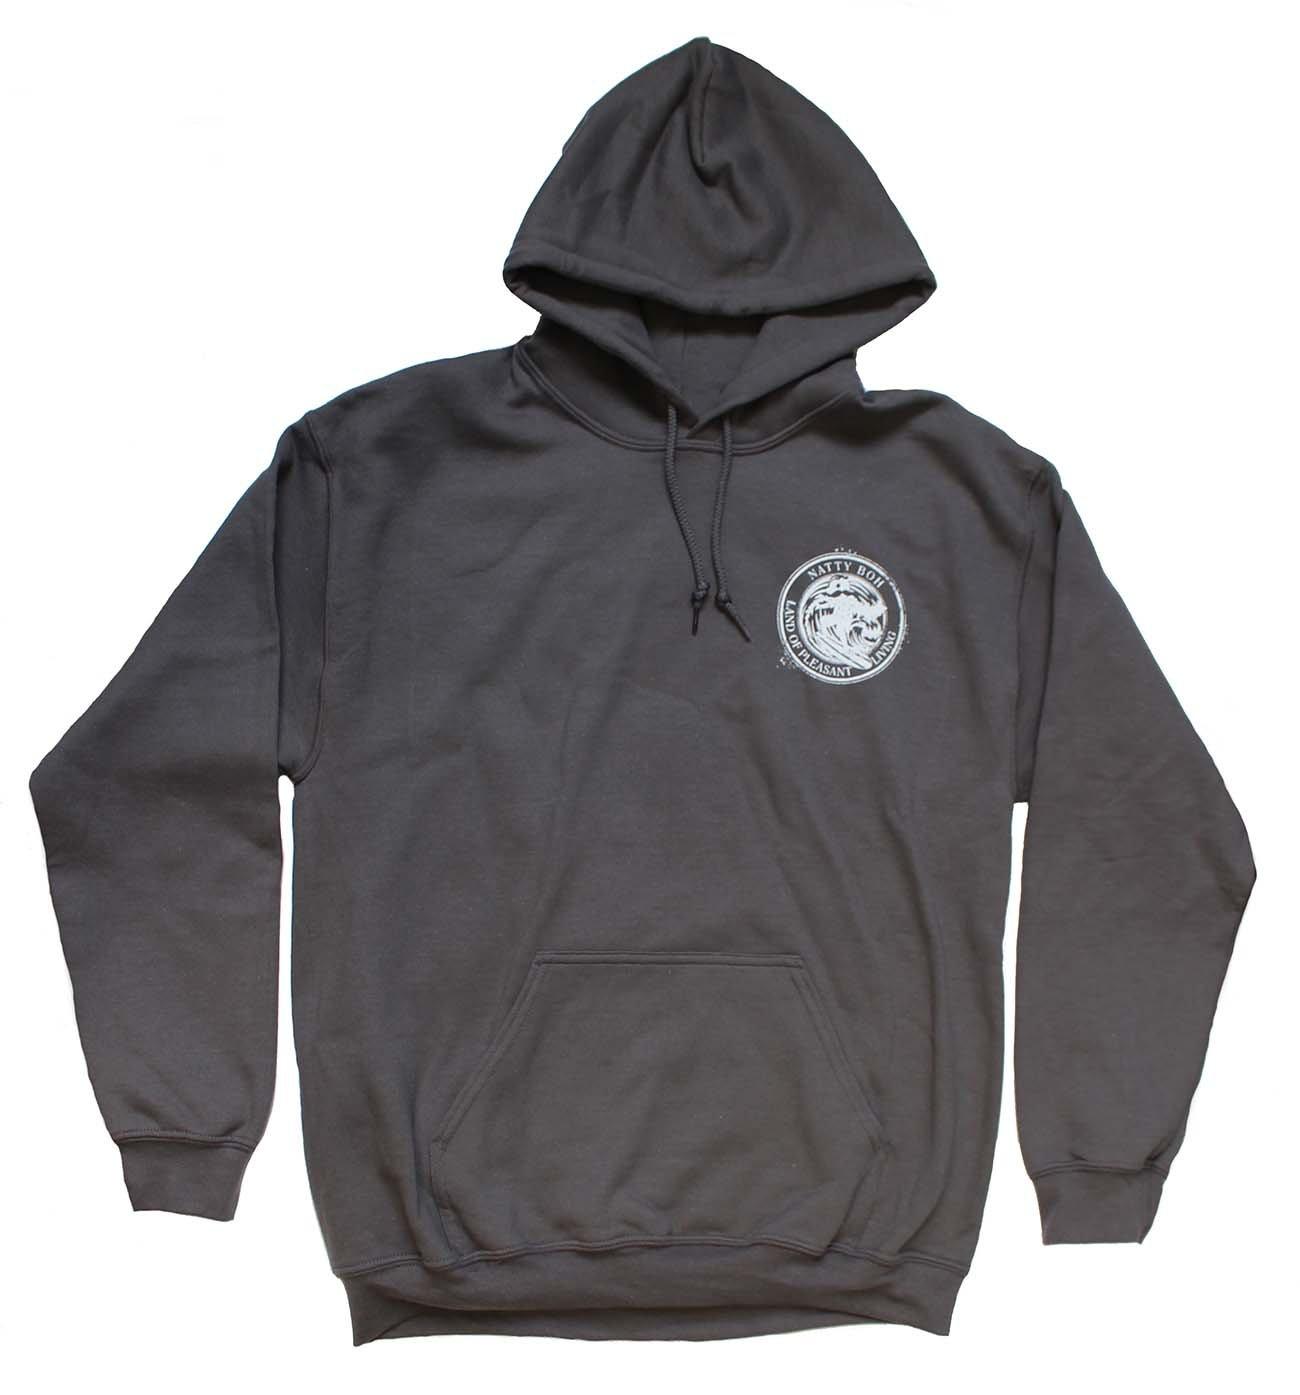 Natty Boh Surfer Dude Land of Pleasant Living (Dark Heather) / Hoodie - Route One Apparel